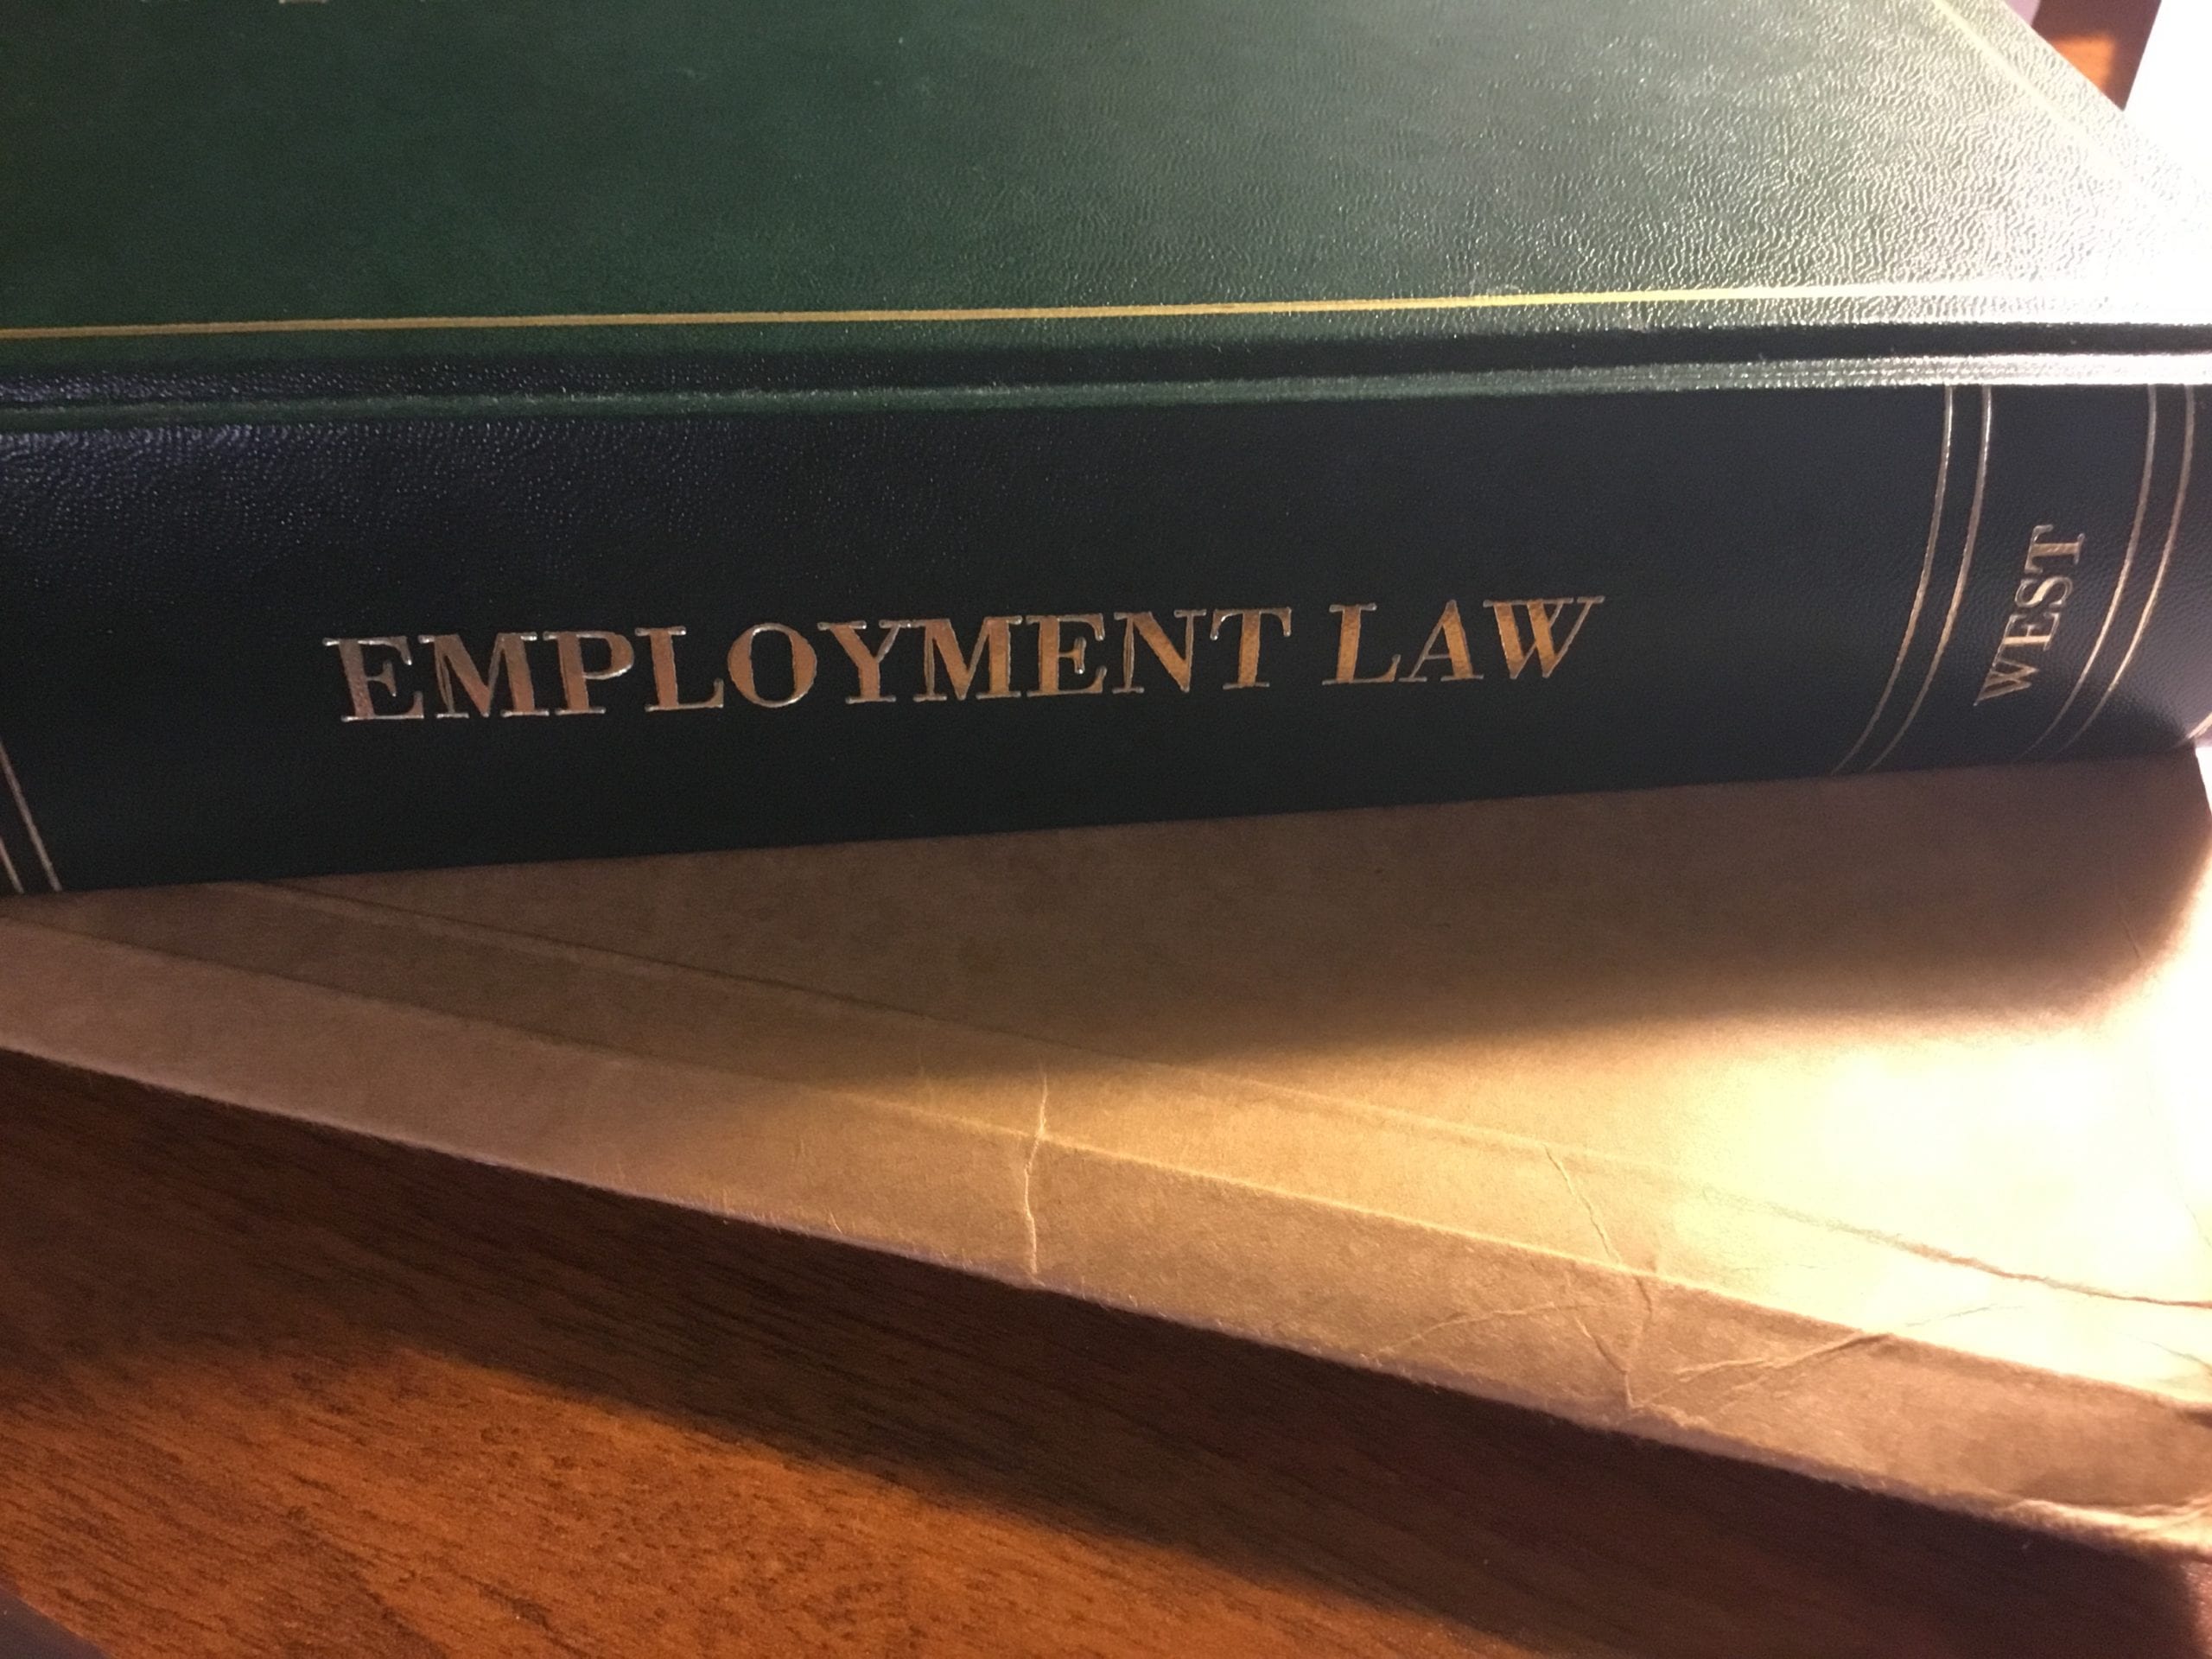 Green Employment Law Book on a desk.